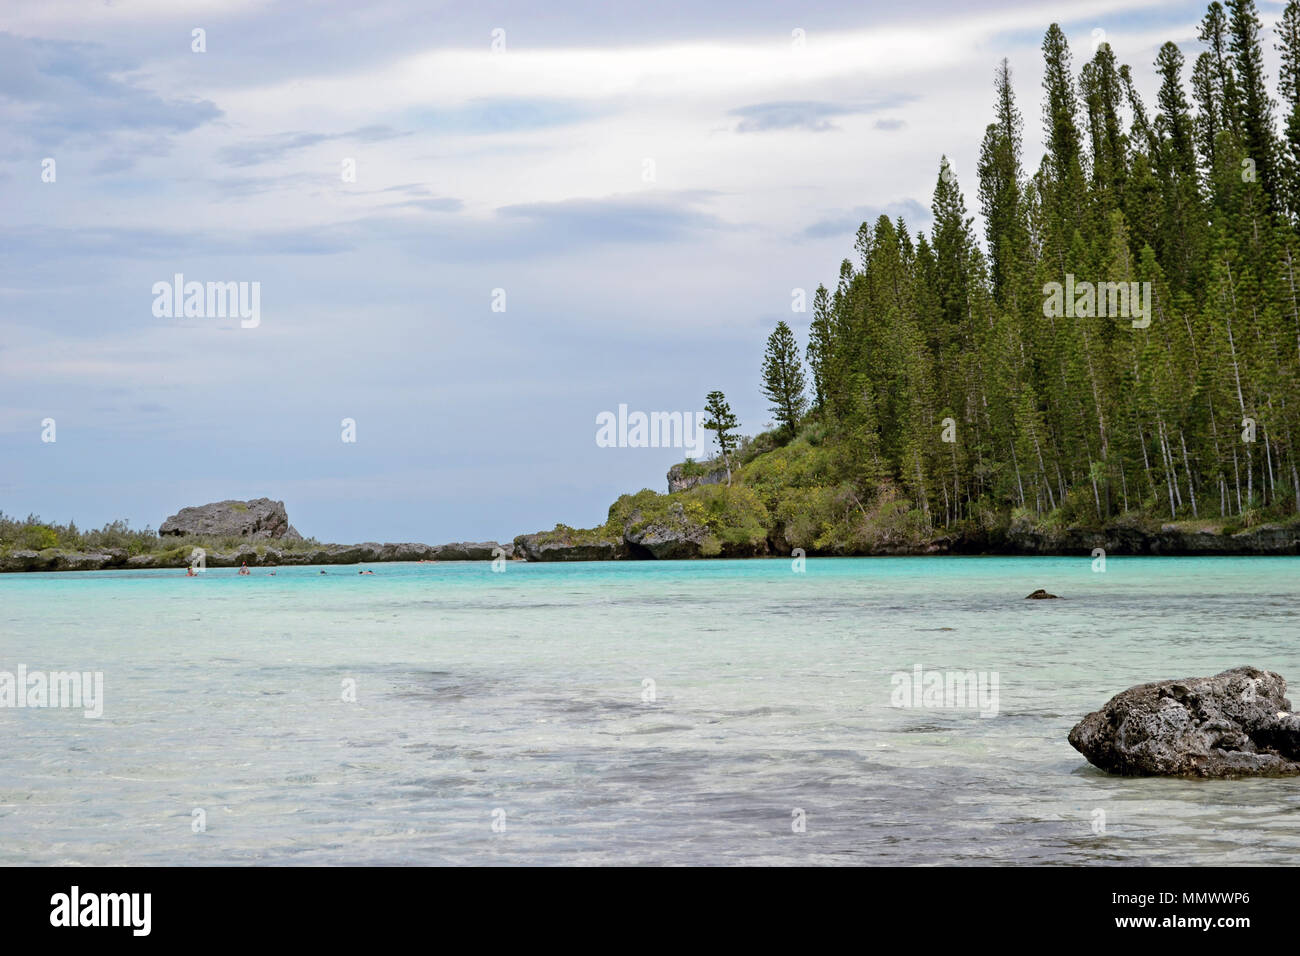 Endemic Cook pines, Araucaria columnaris, Natural Pool of Oro Bay, Isle of Pines, New Caledonia, South Pacific Stock Photo